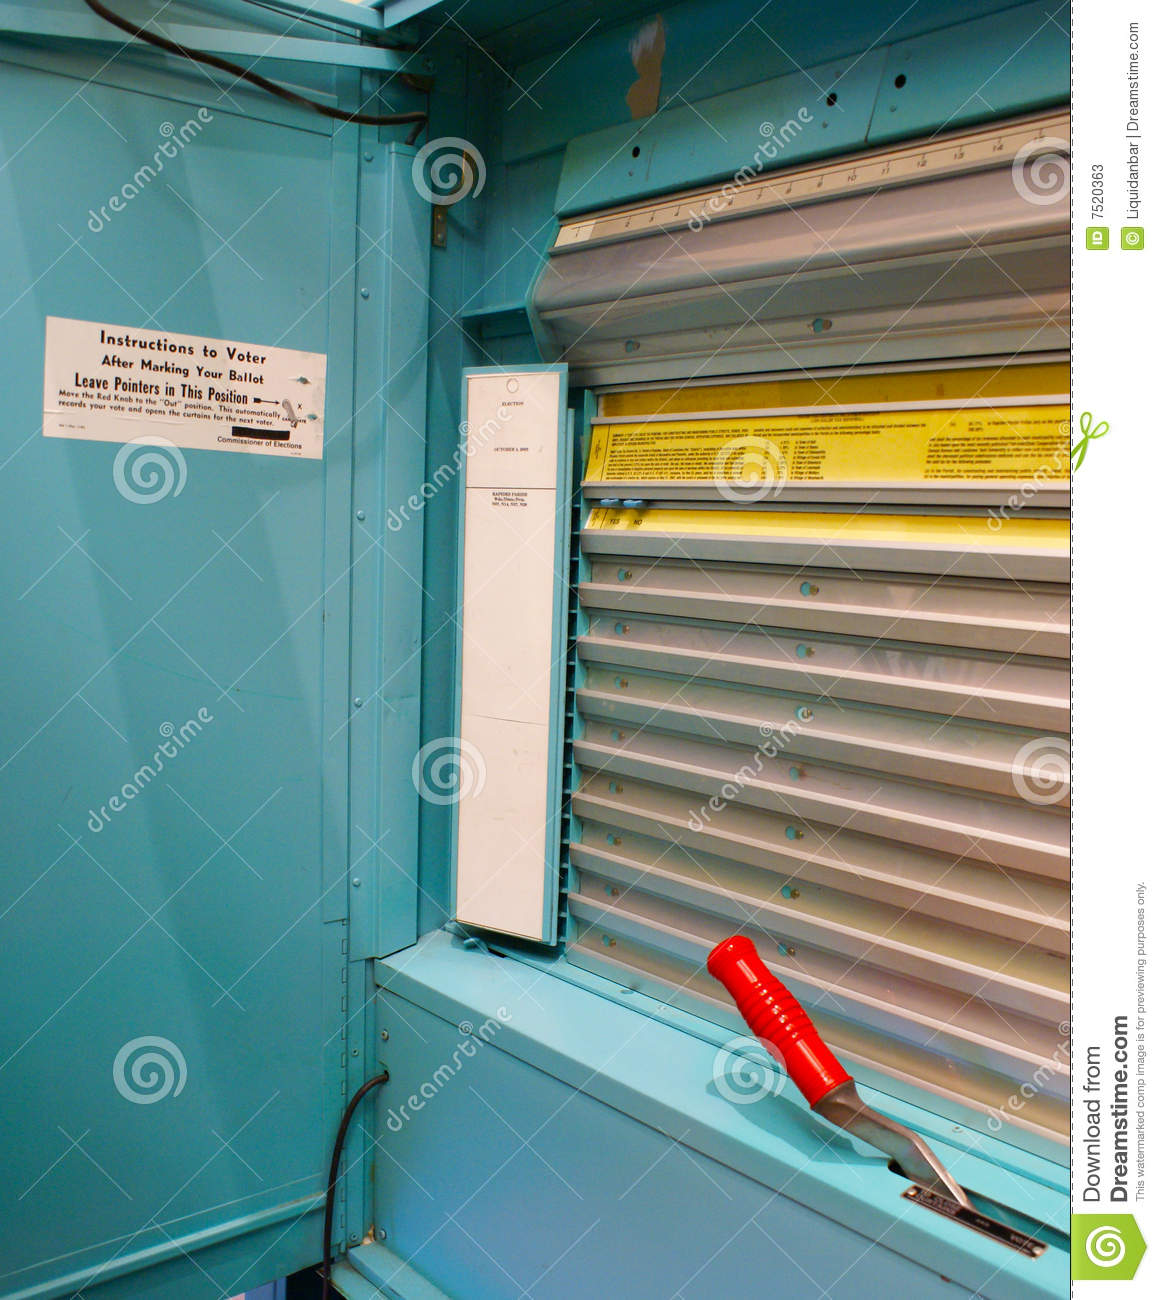 More Similar Stock Images Of   Vintage Voting Booth